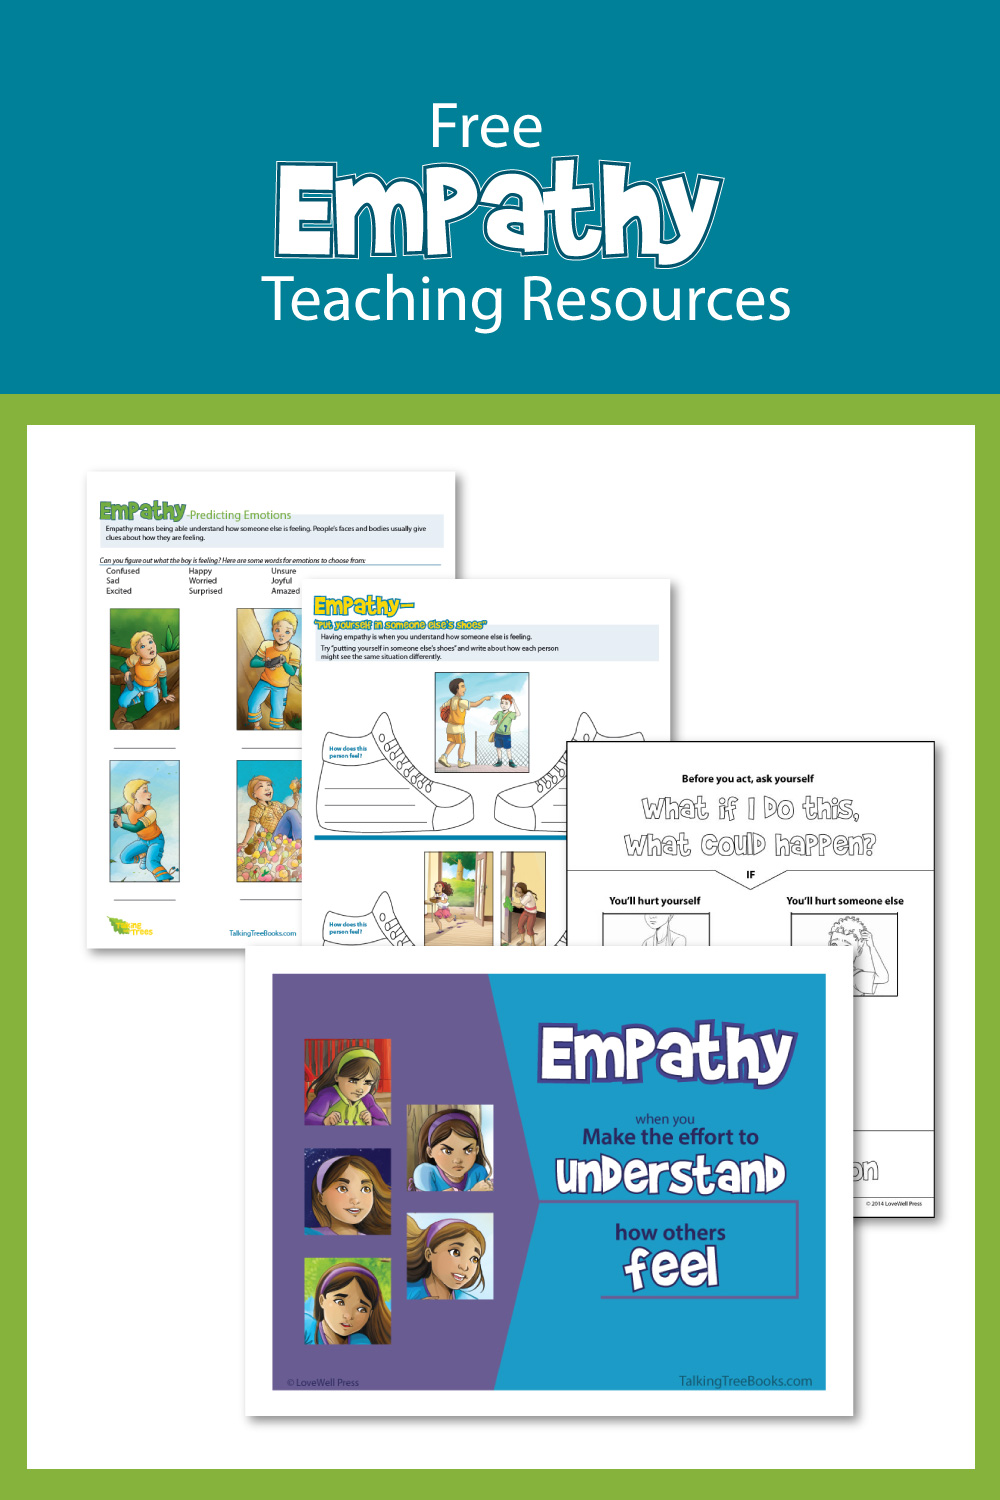 Empathy Teaching Resources for Elementary School Aged Children